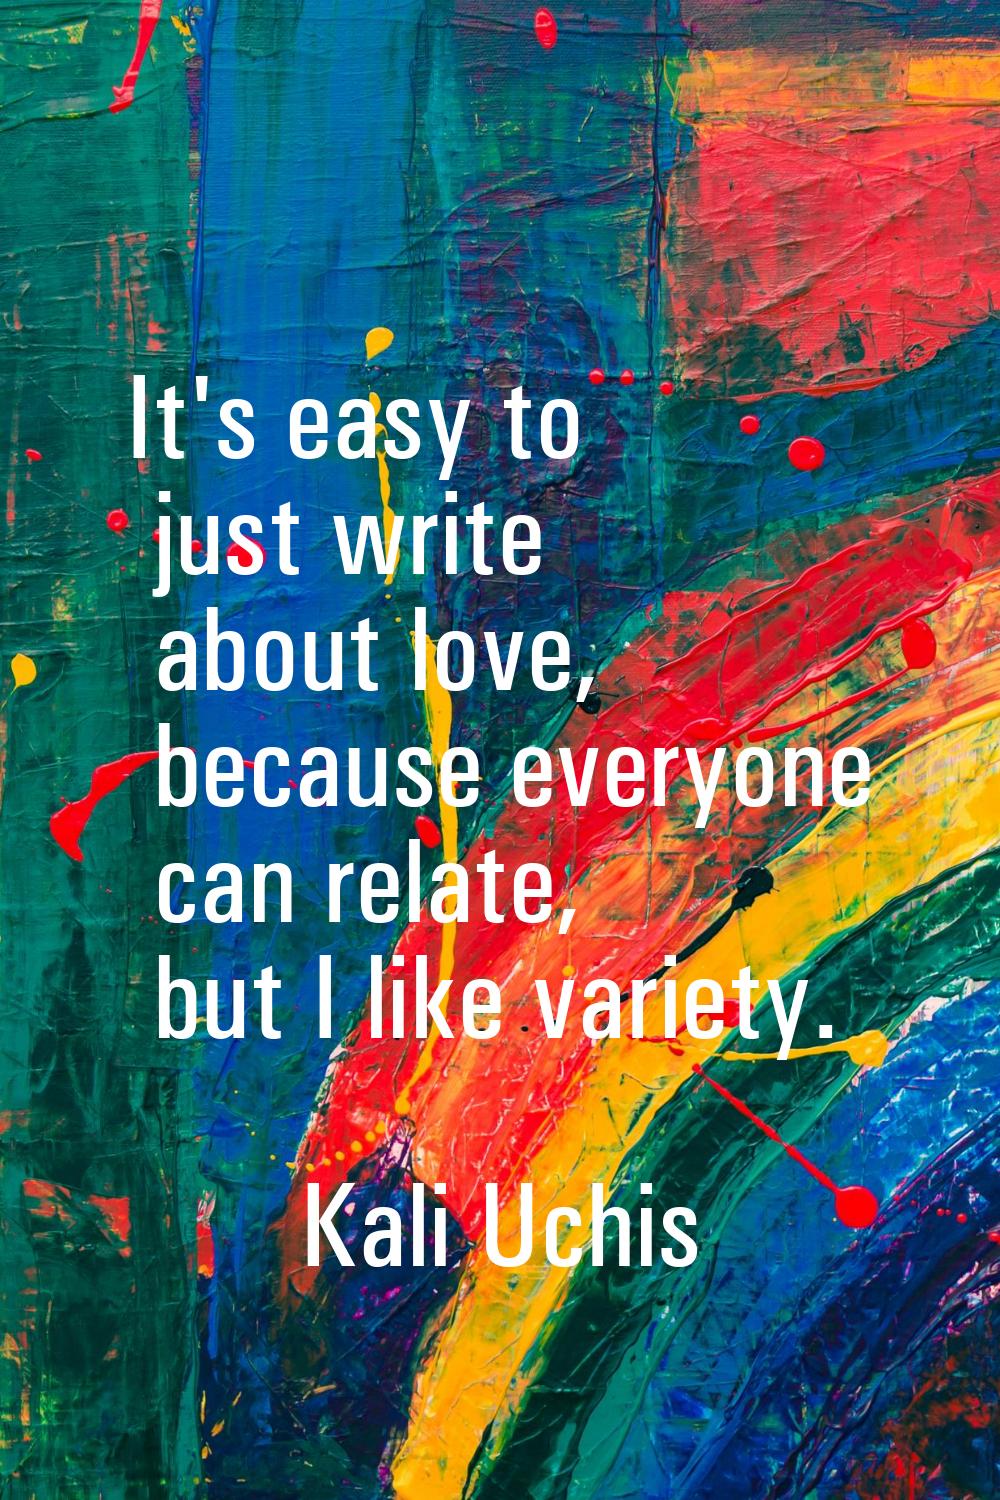 It's easy to just write about love, because everyone can relate, but I like variety.